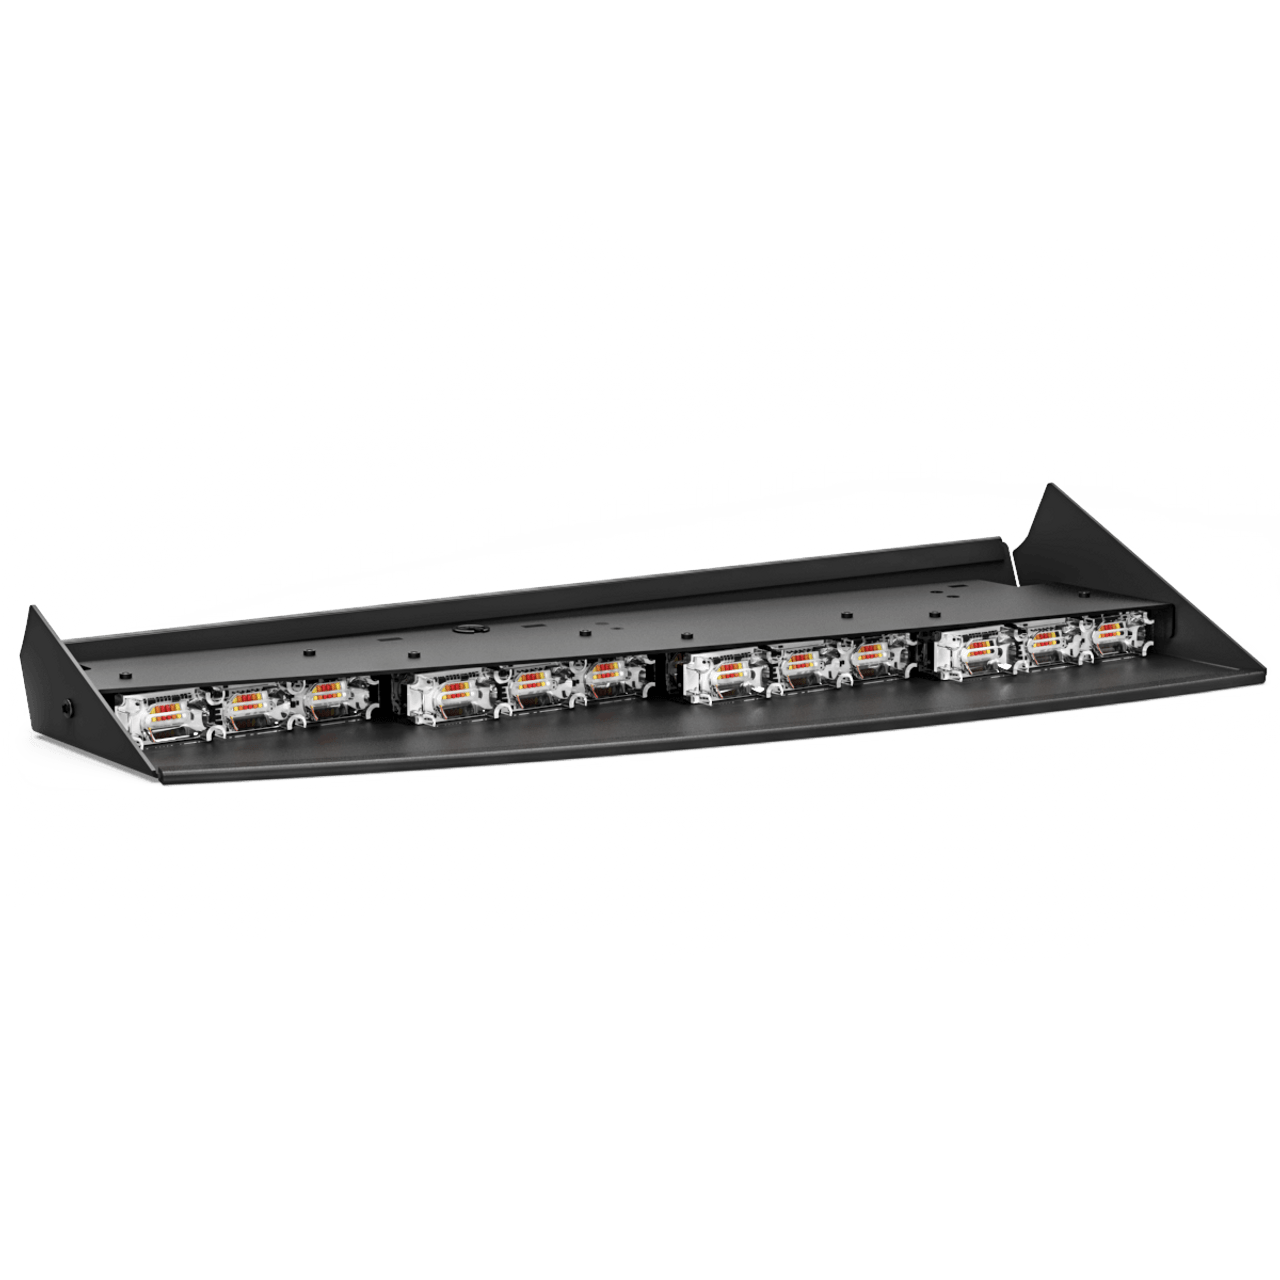 Feniex Q-0910-F250350-17-20 Quad, Ford F-250, F-350 2017-2020 Interior Light Bar, Front Facing, Four LED Colors Each Side (Red, Blue, White and Amber), FEN-Q-0910-F250350-17-20